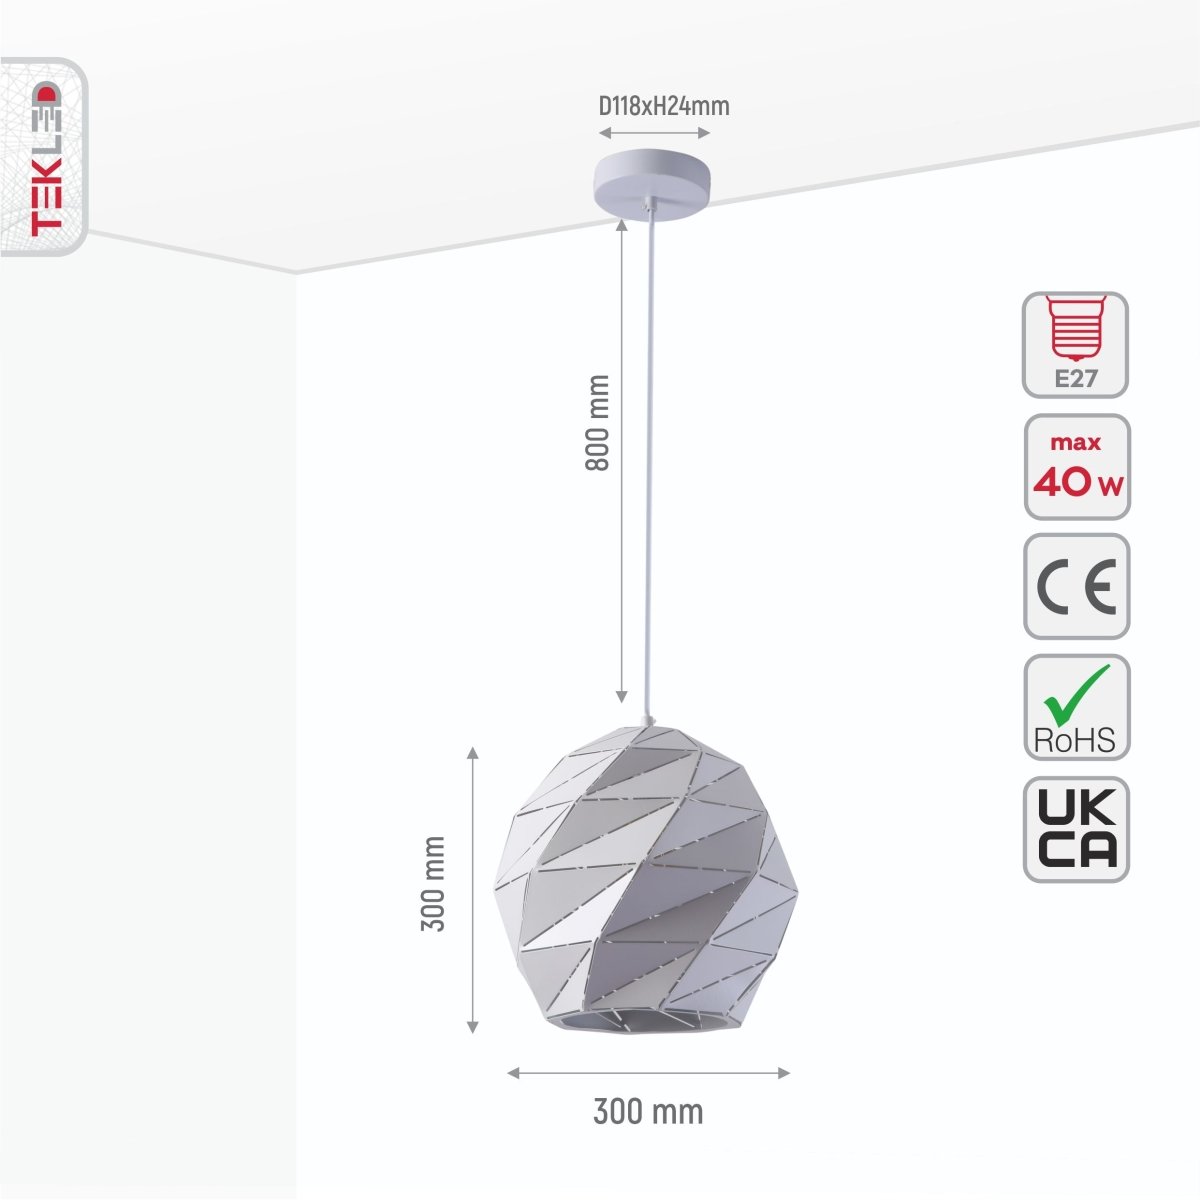 Size and specs of White Metal Laser Cut Globe Pendant Light Large with E27 Fitting | TEKLED 150-18262